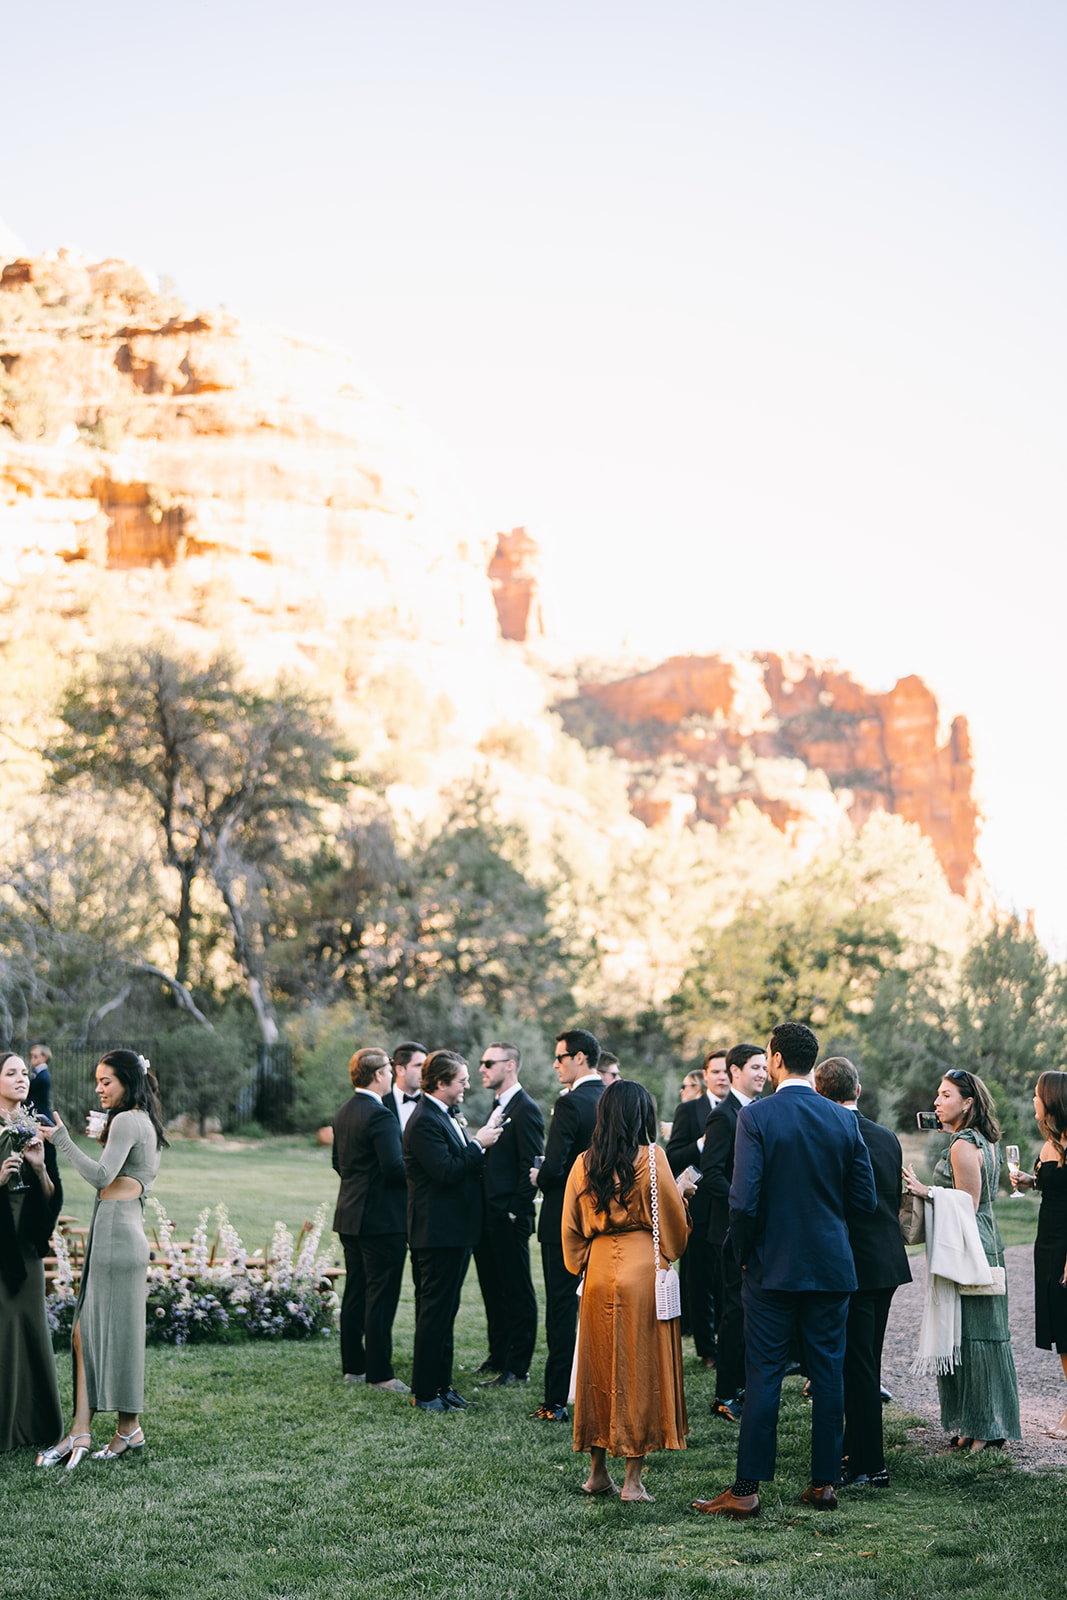 Wedding guests in dark colors standing except one woman in a golden dress with mountains in background